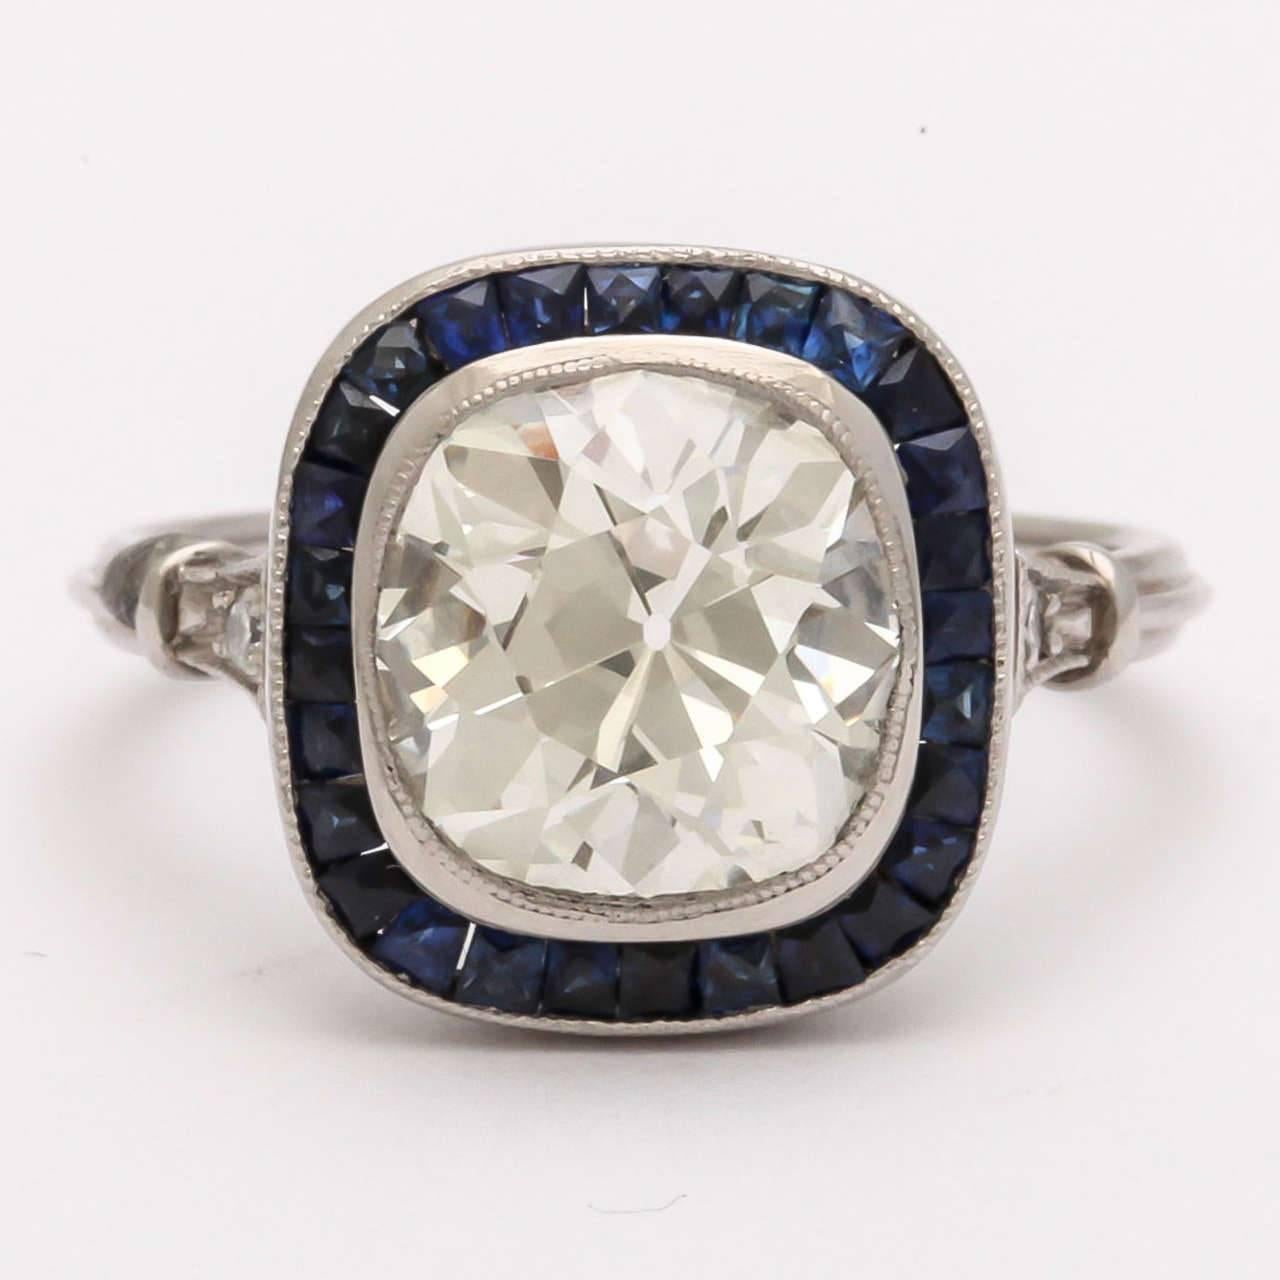 A stunning 2.60ct VS-1 J/K vintage cushion cut diamond is surrounded by French cut natural sapphires flanked by two smaller brilliant cut diamonds and set into a handcrafted custom designed mount. Appraisal available.